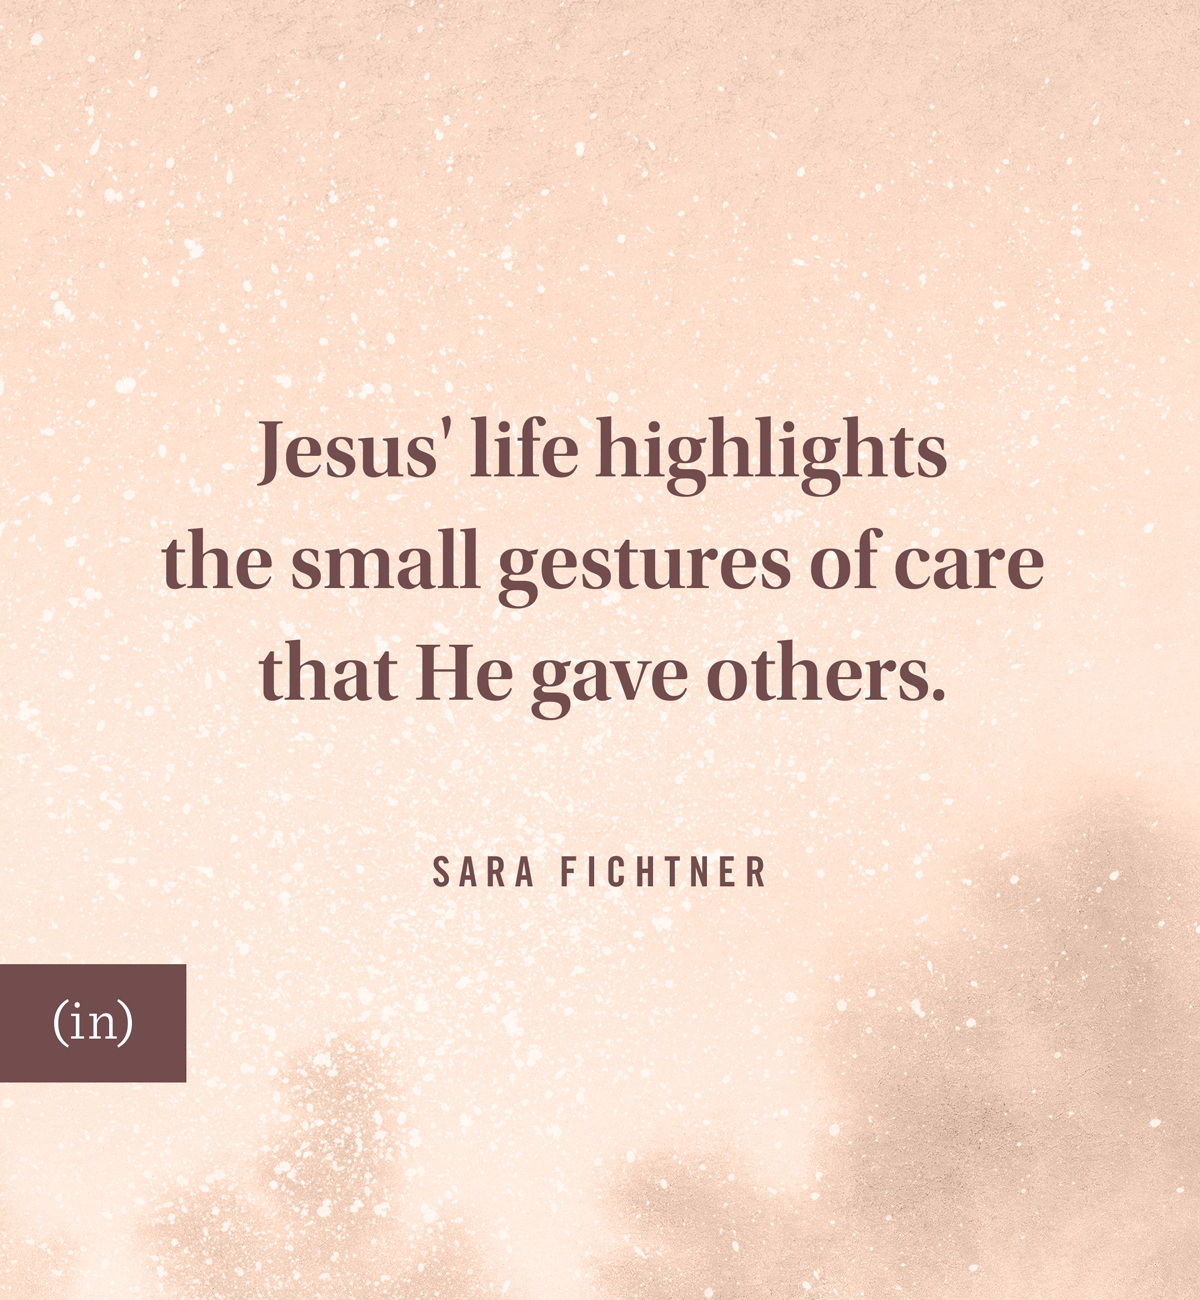 Jesus' life highlights the small gestures of care that He gave others. -Sara Fichtner